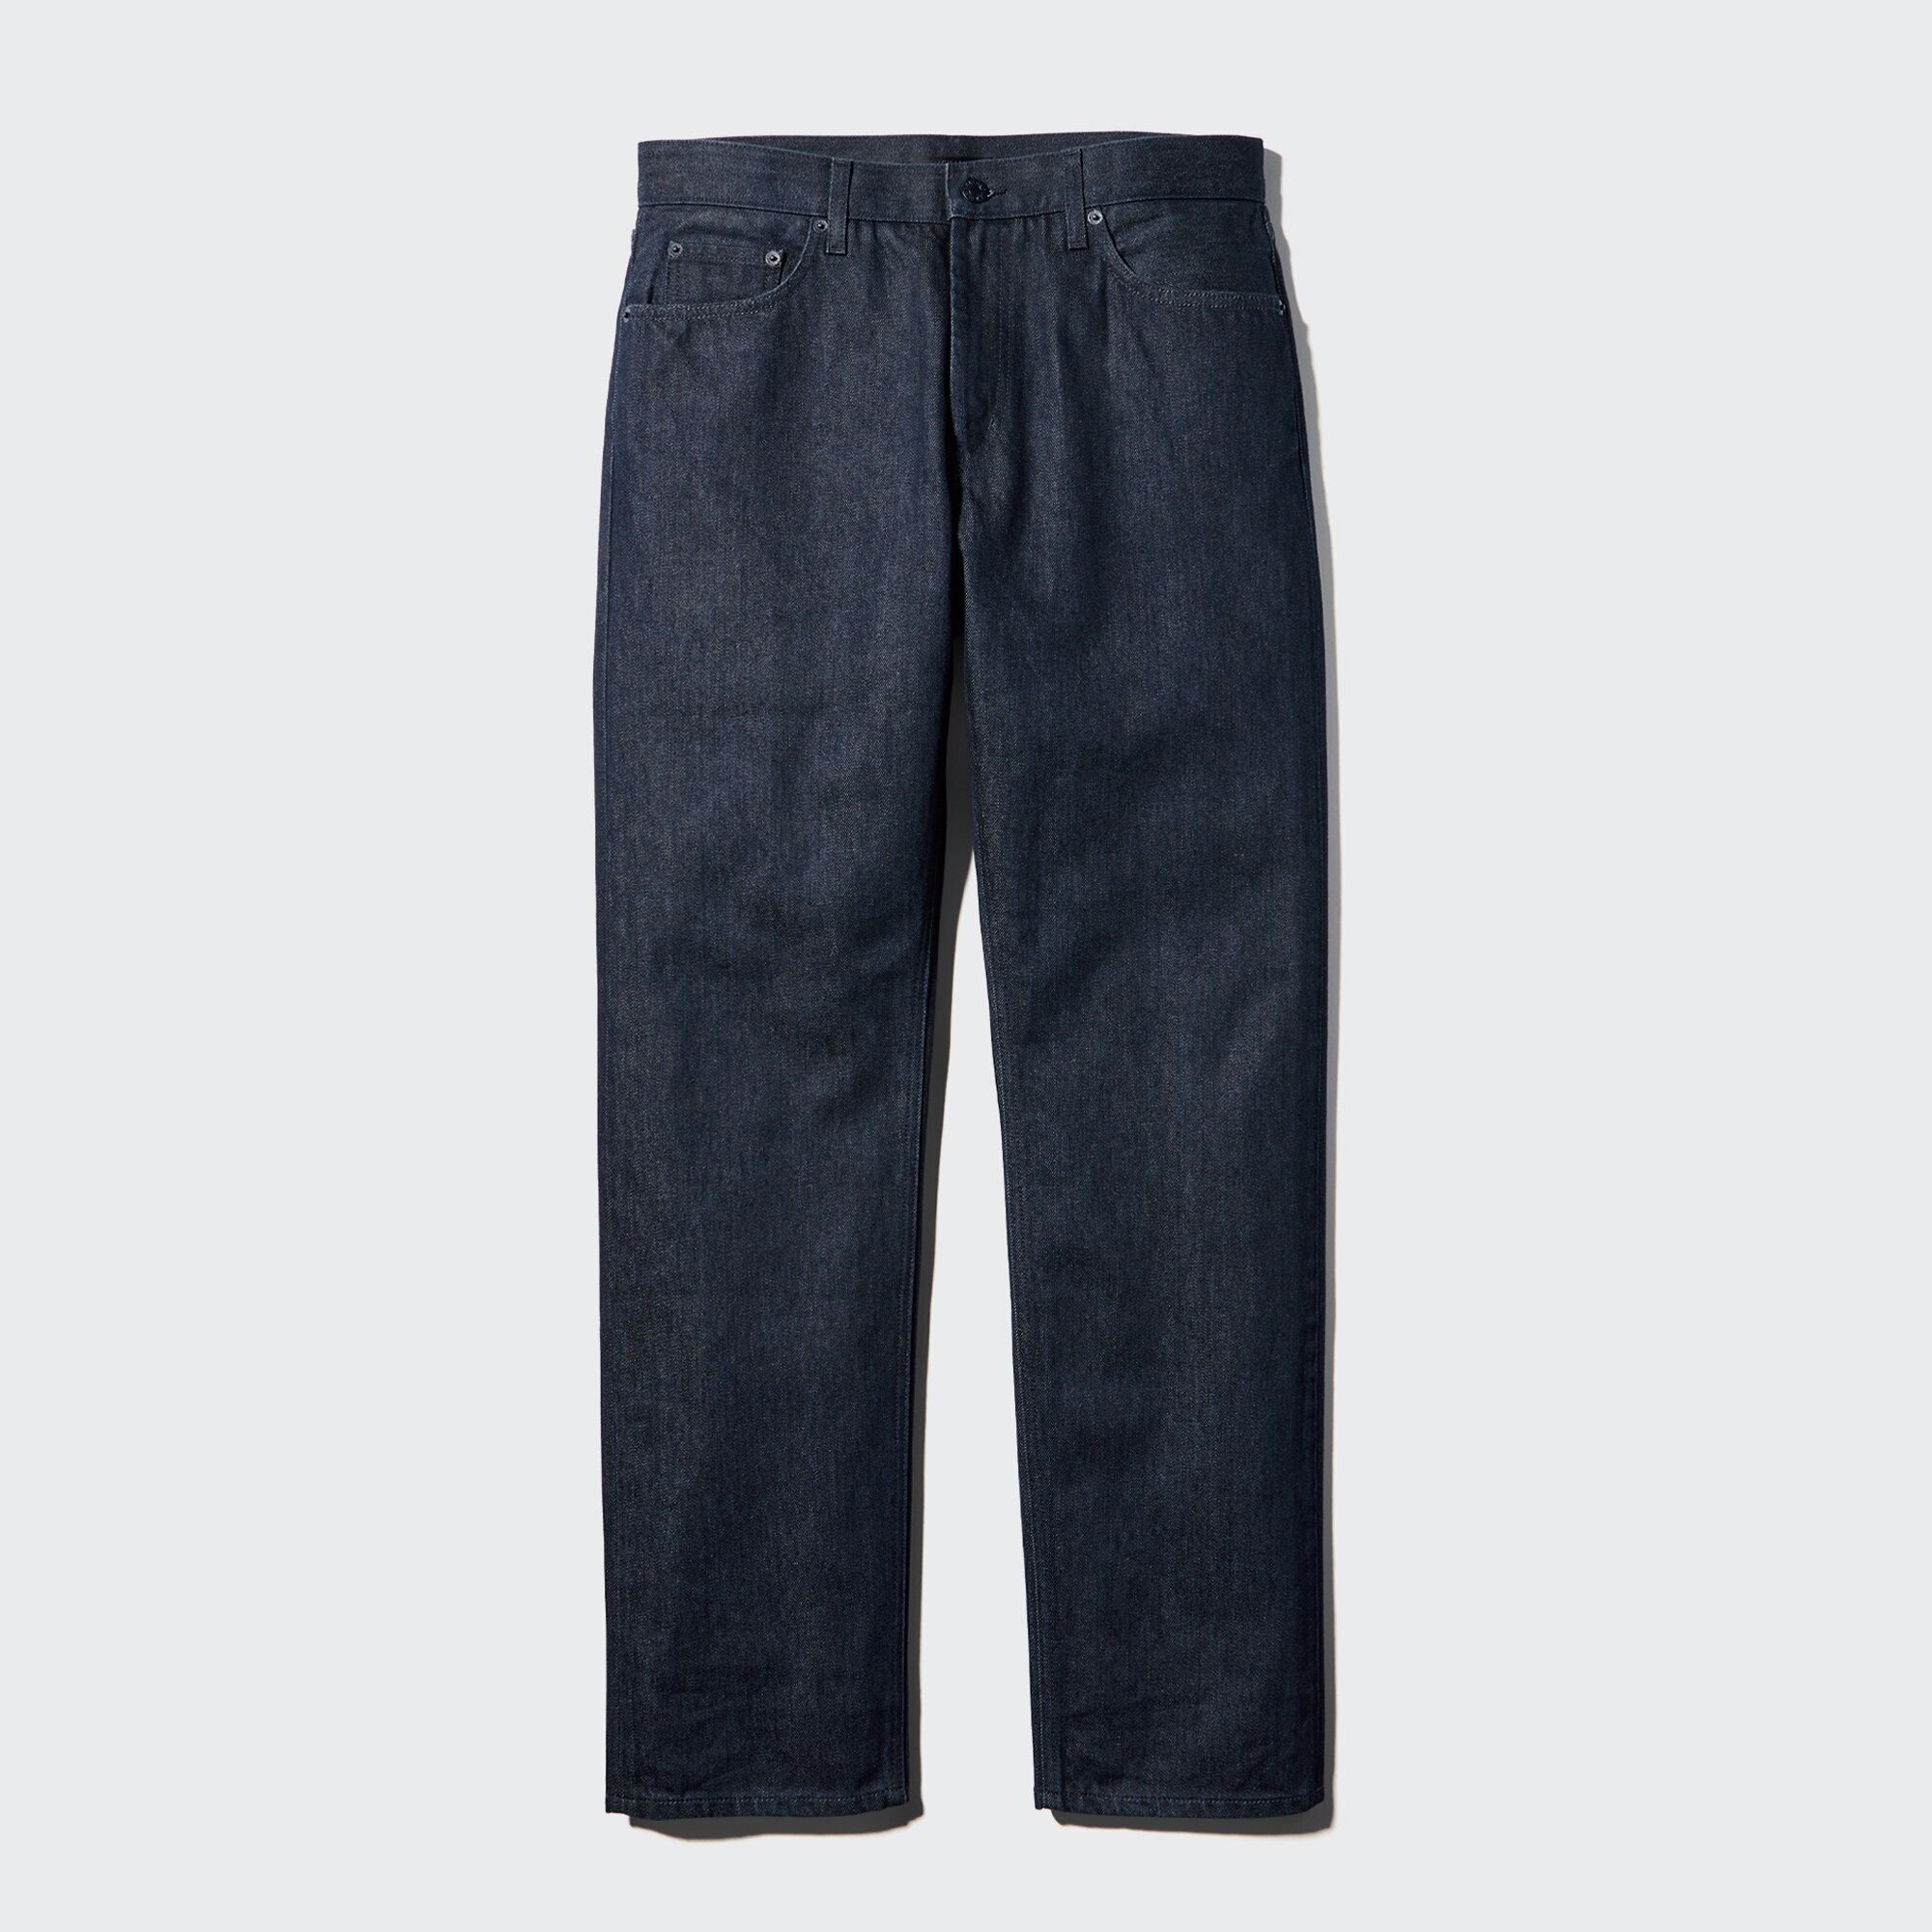 PLST(プラステ)公式 | UNIQLO and HELMUT LANG Classic Cut Jeans